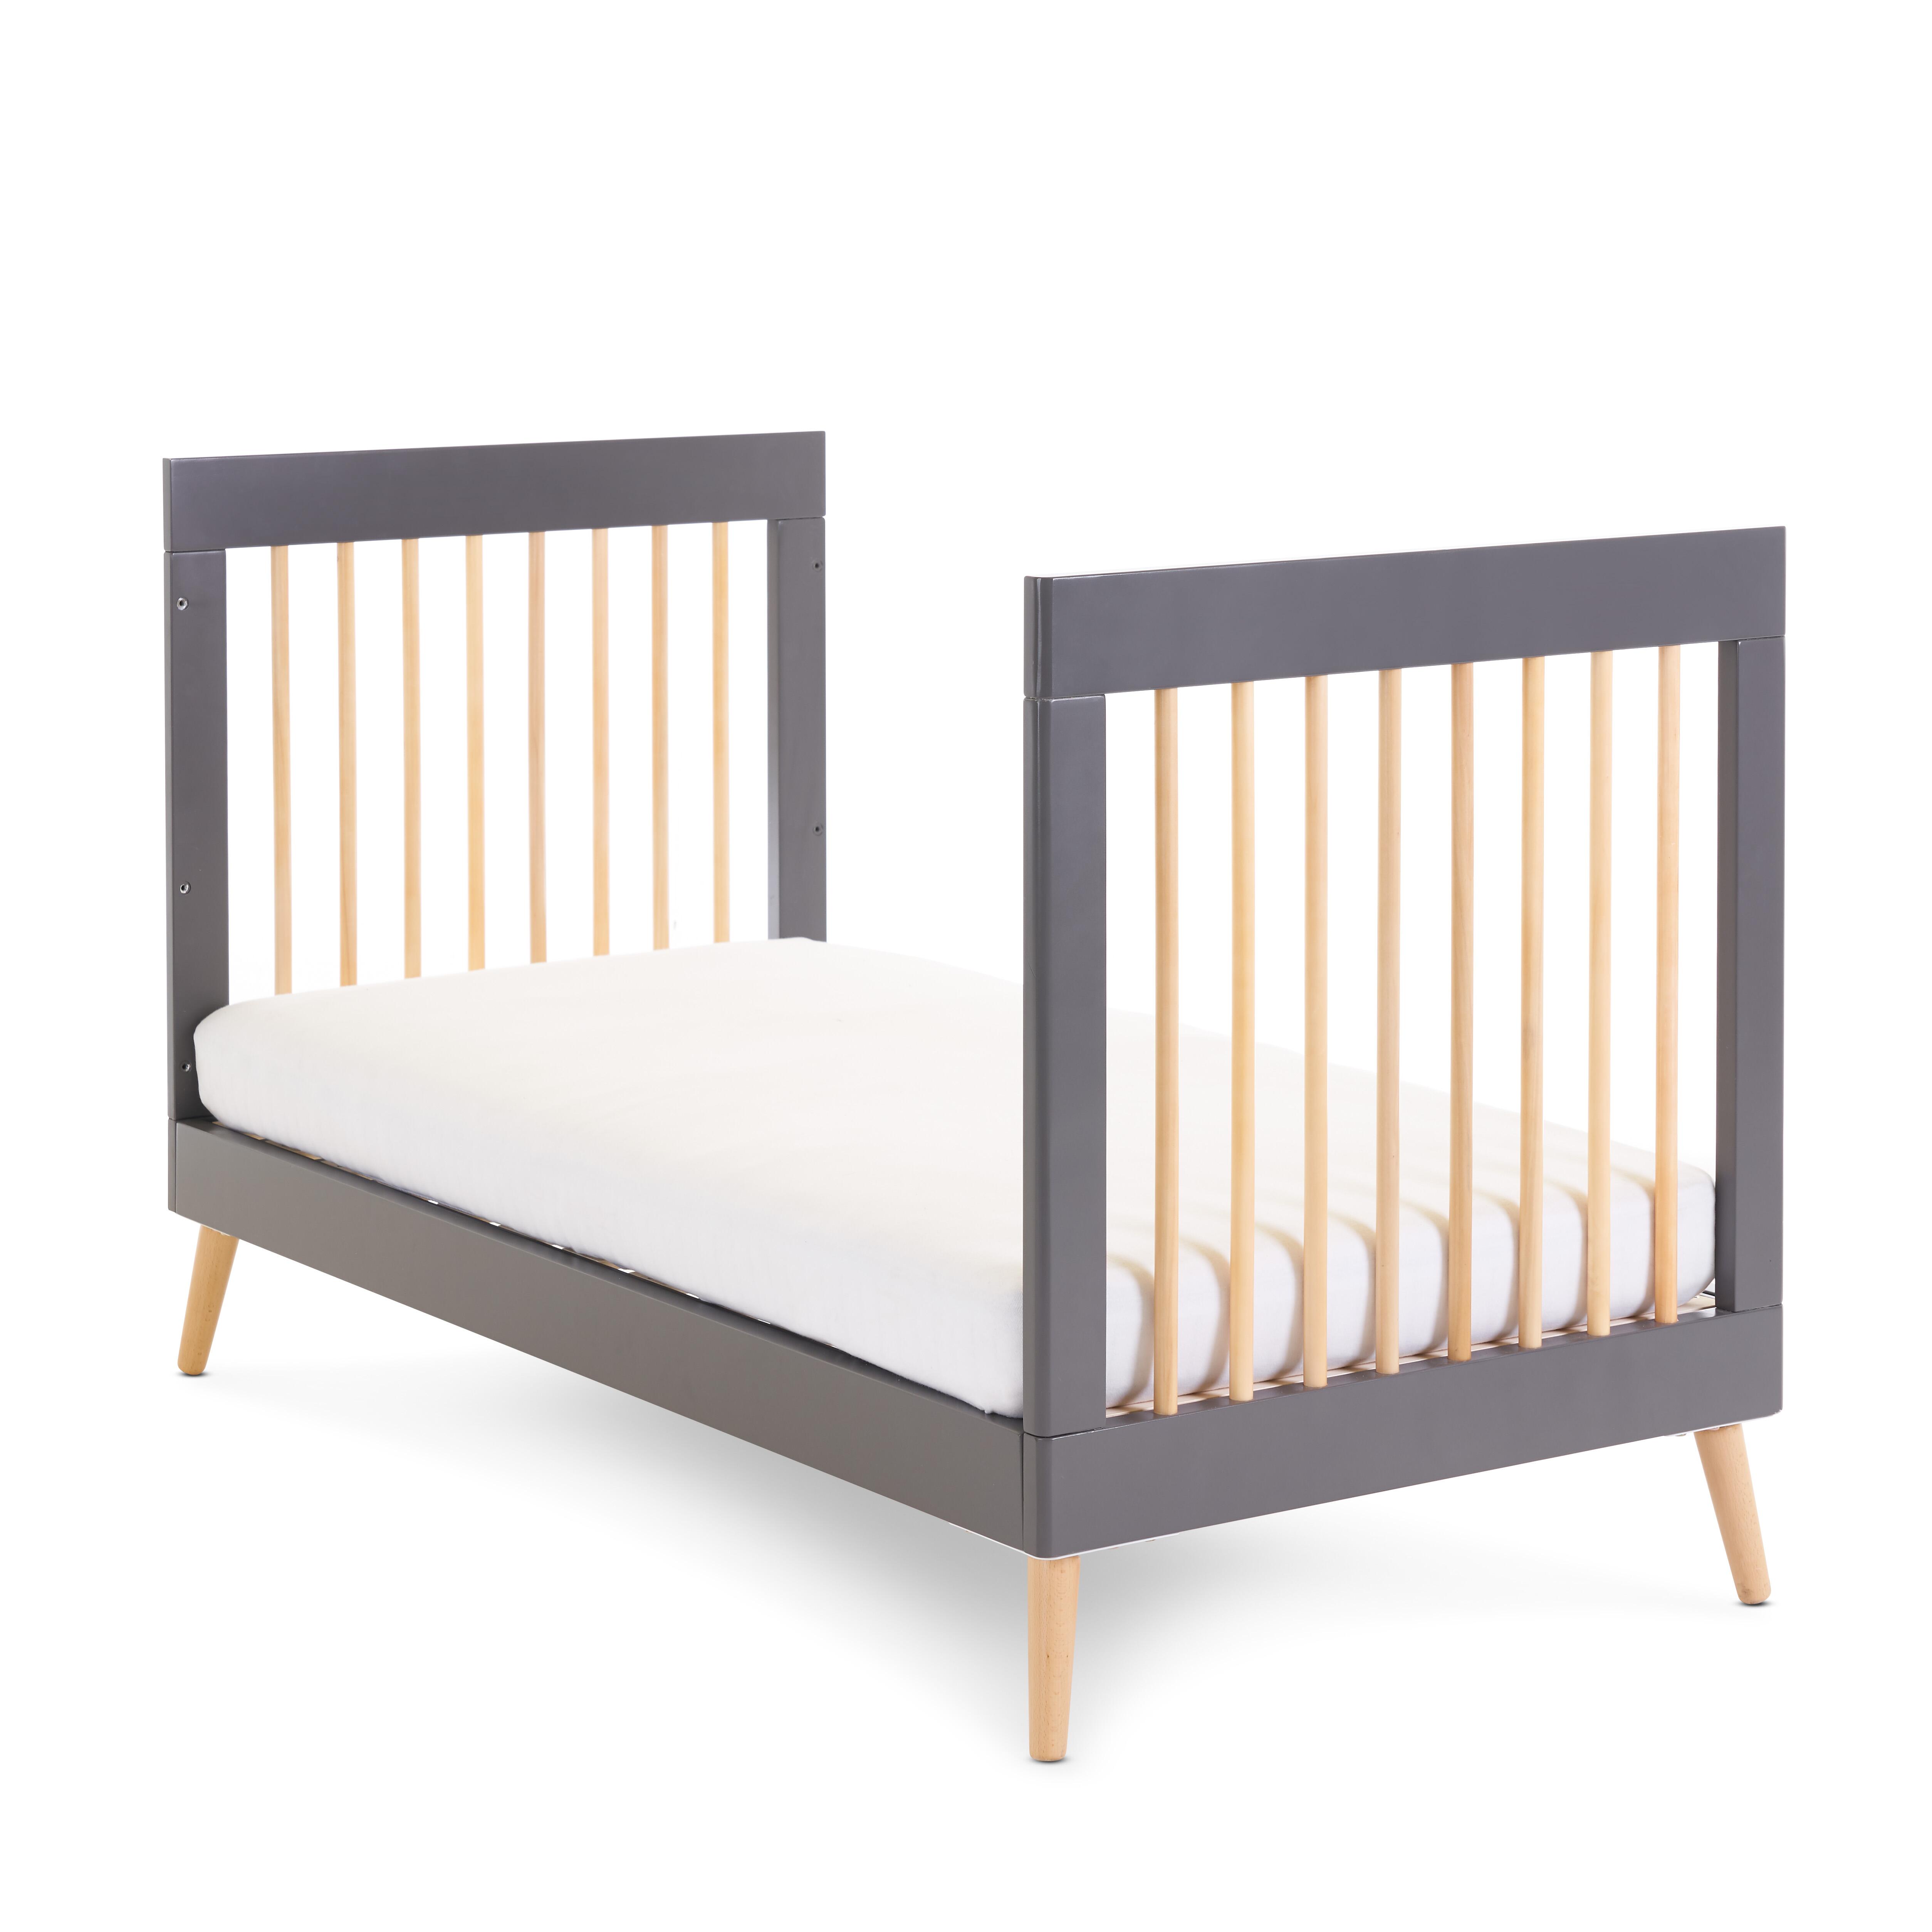 OBaby Scandi Style cot bed - grey